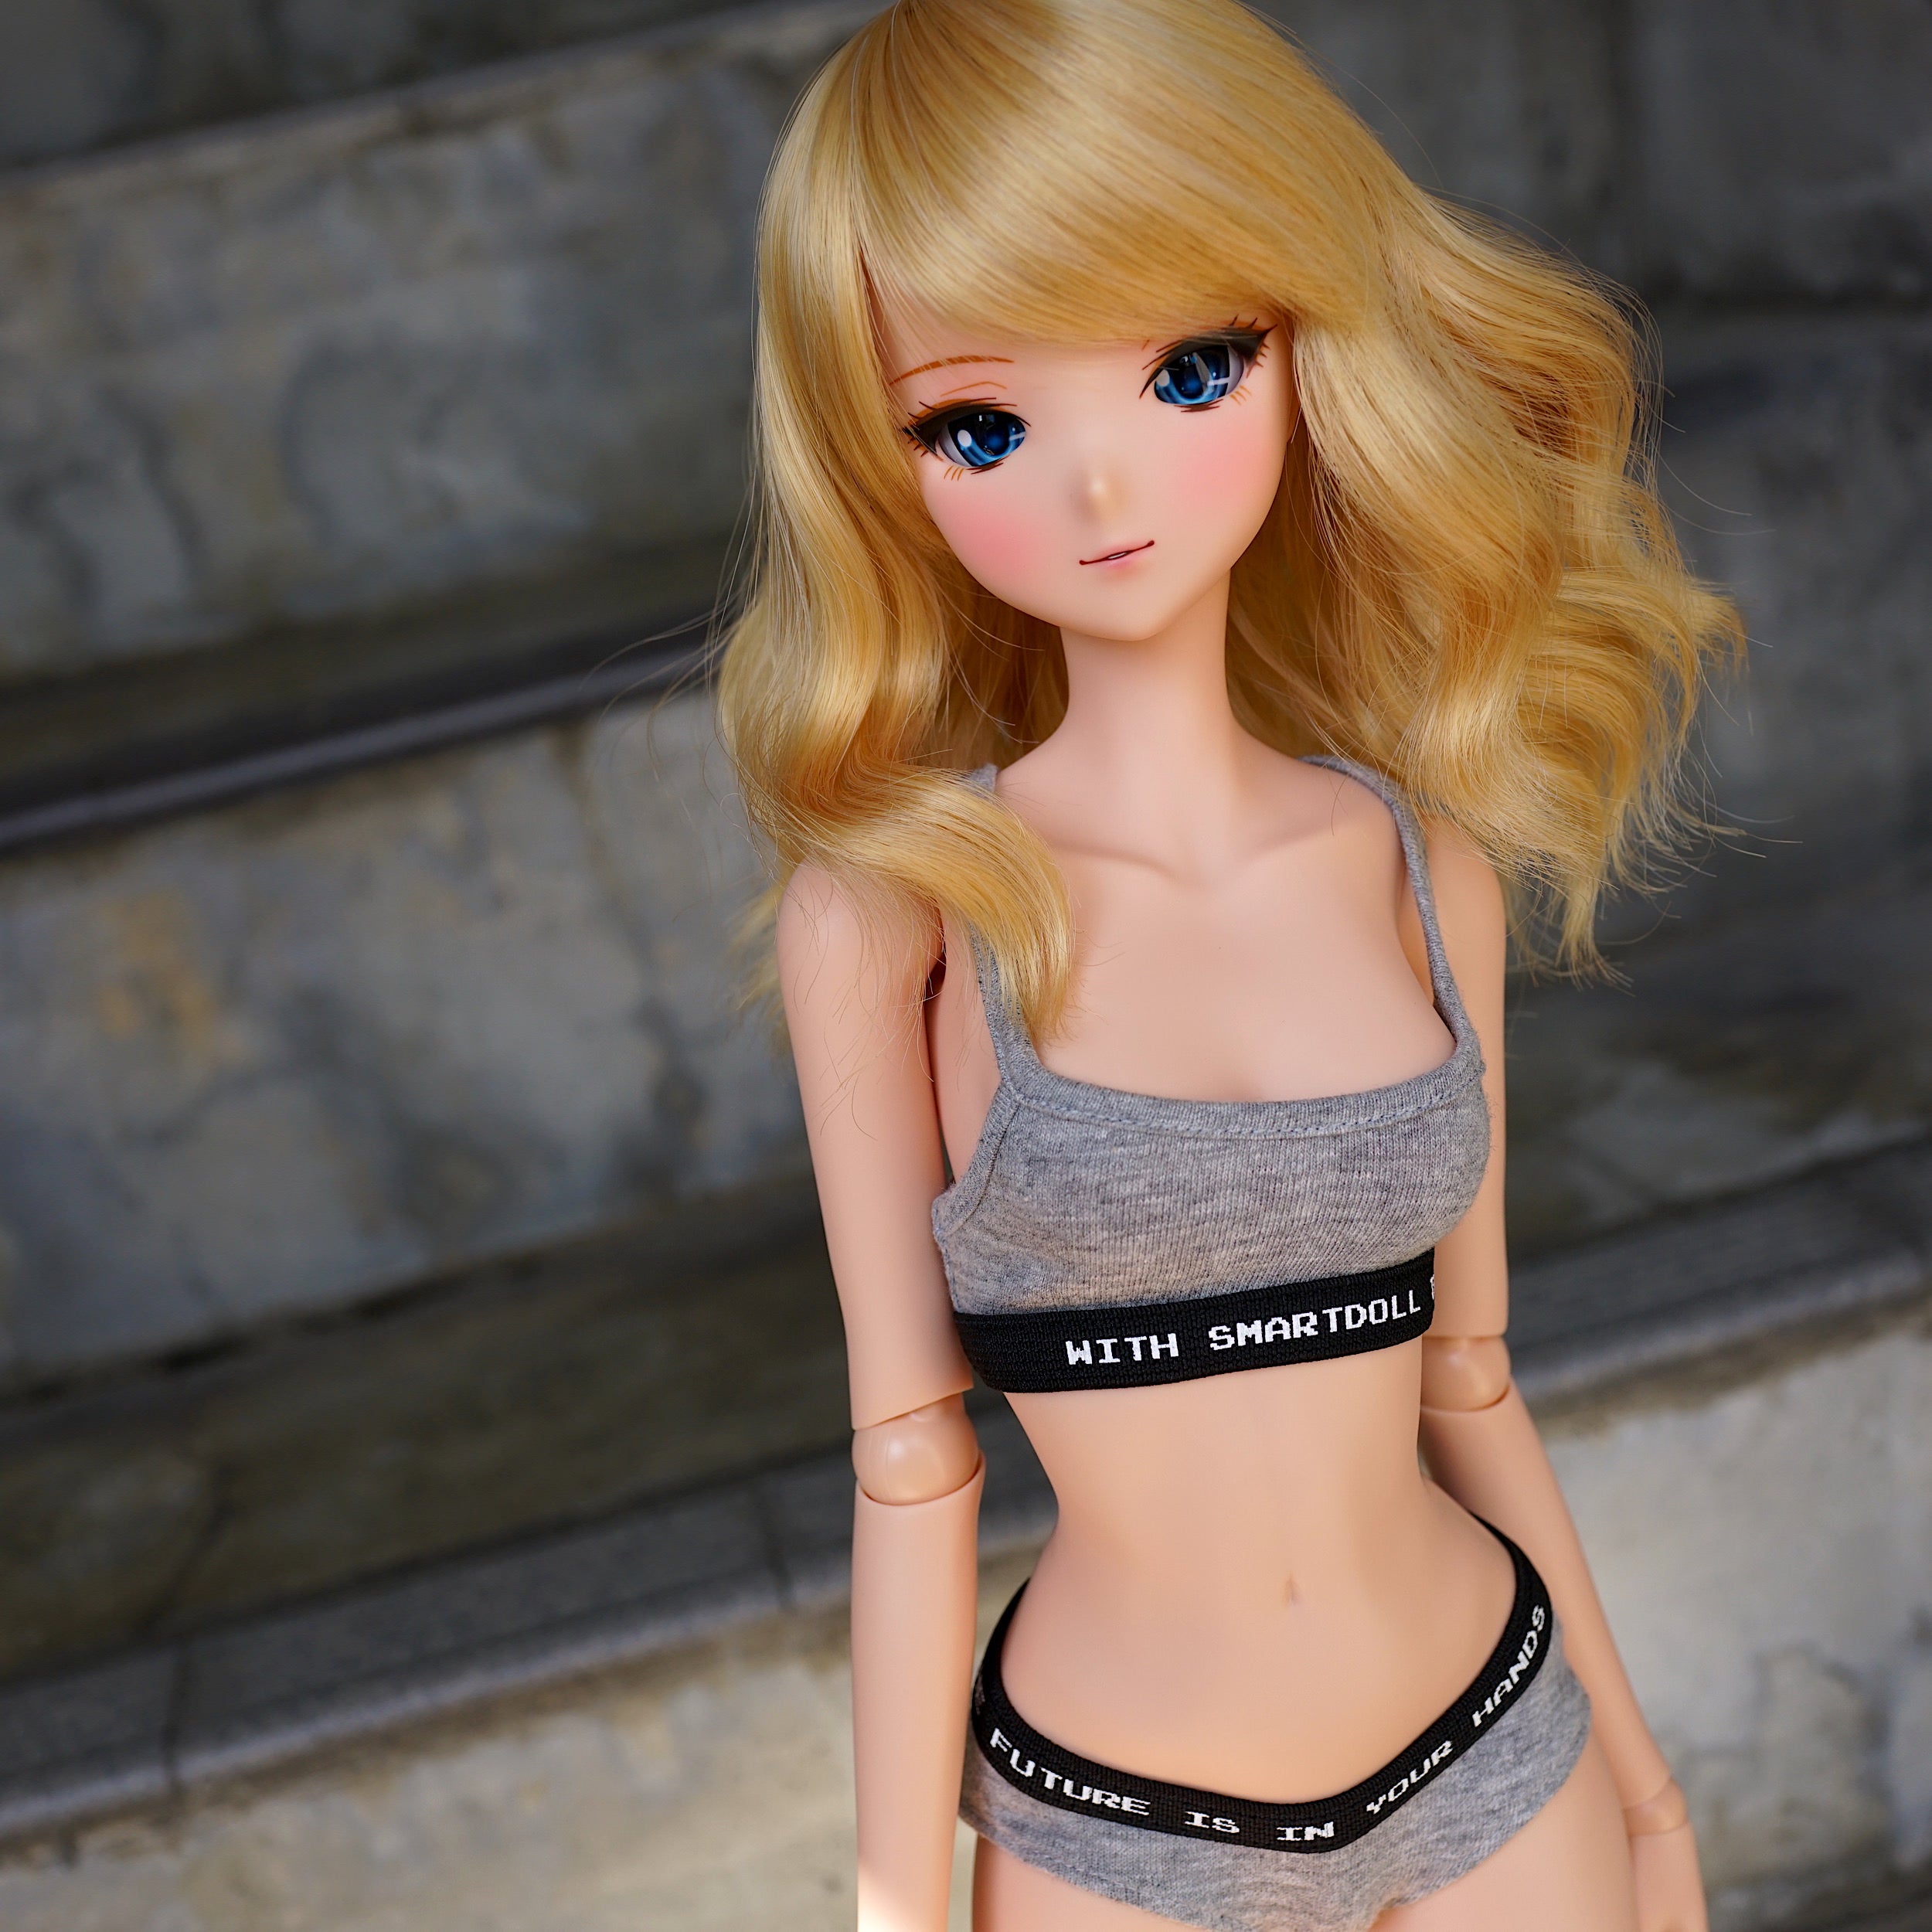 The Bottoms Basic Collection to Fit Smart Doll or Other Similar 1